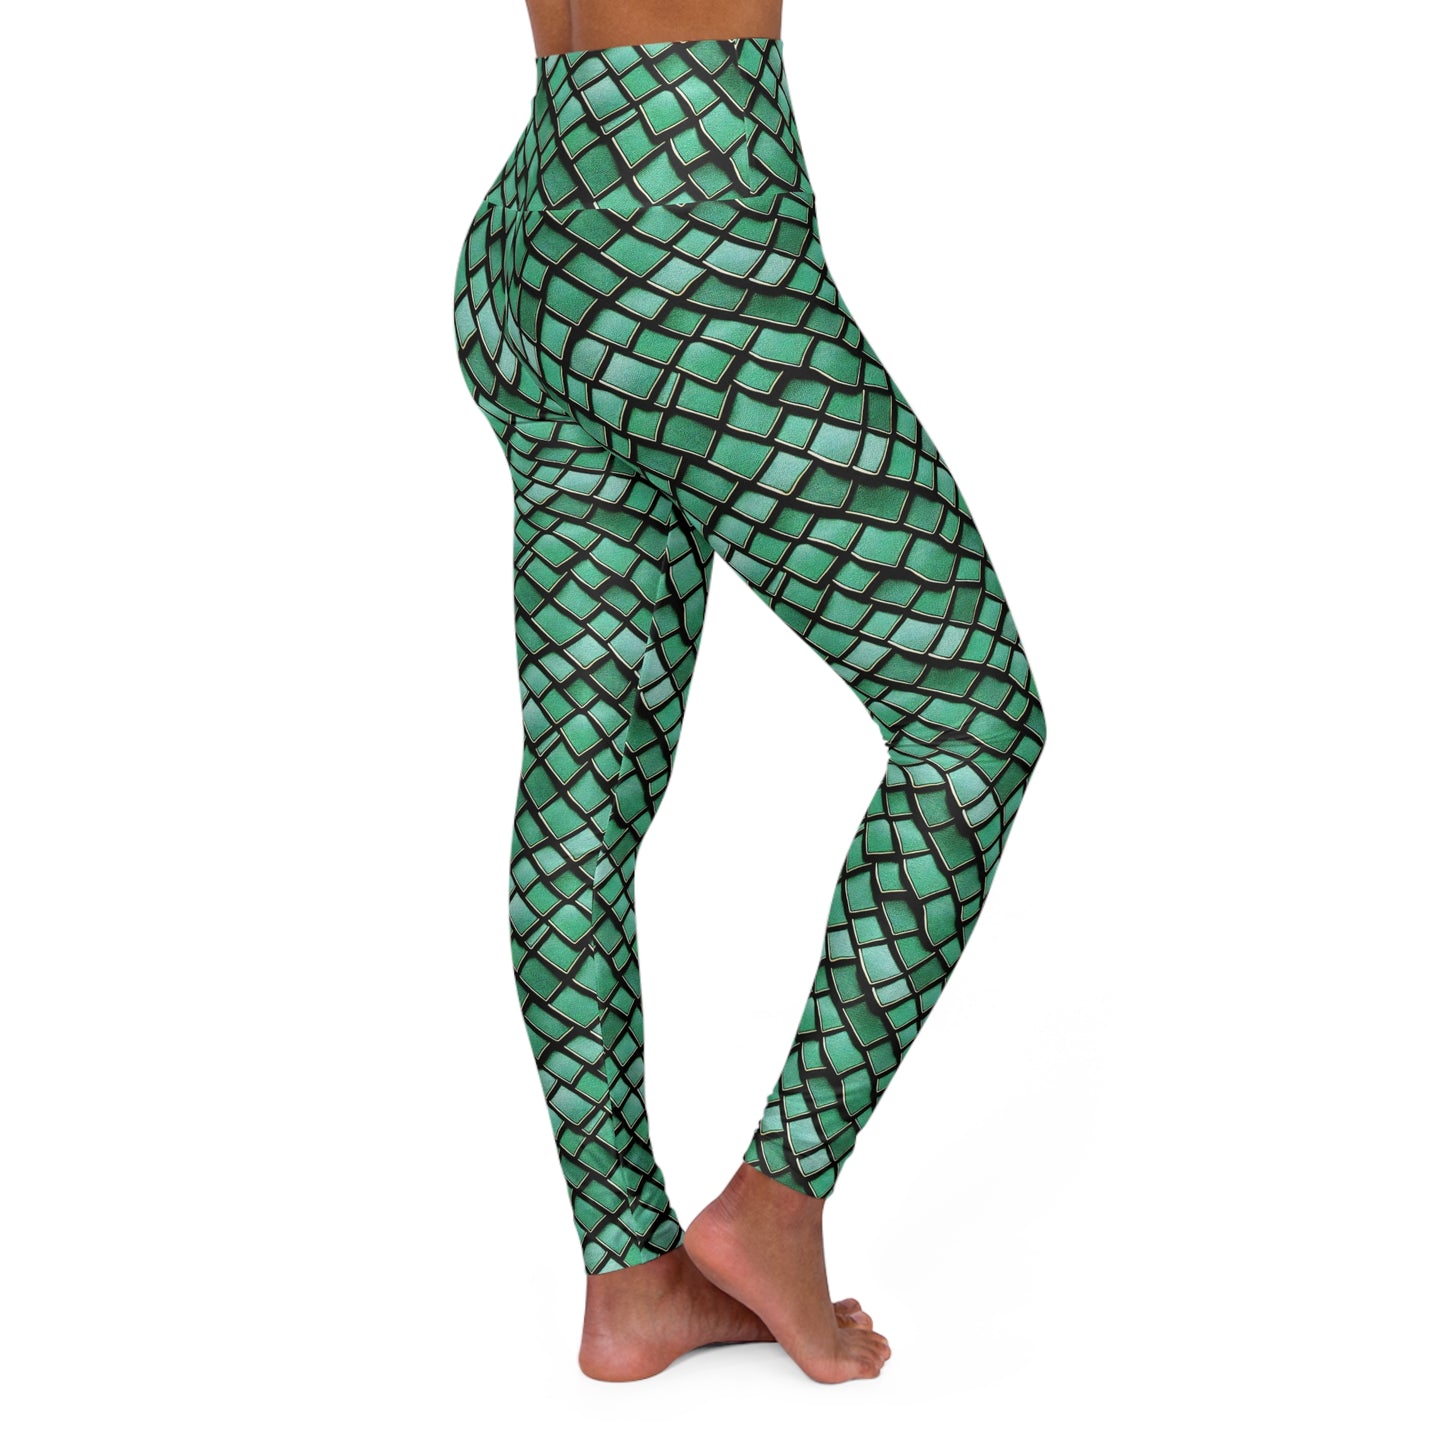 High Waisted Green Dragon Scale Mermaid Style Leggings - Ocean and Dragon-Inspired Scales, Athleticwear, Gym wear, Stylish Yoga Pants!